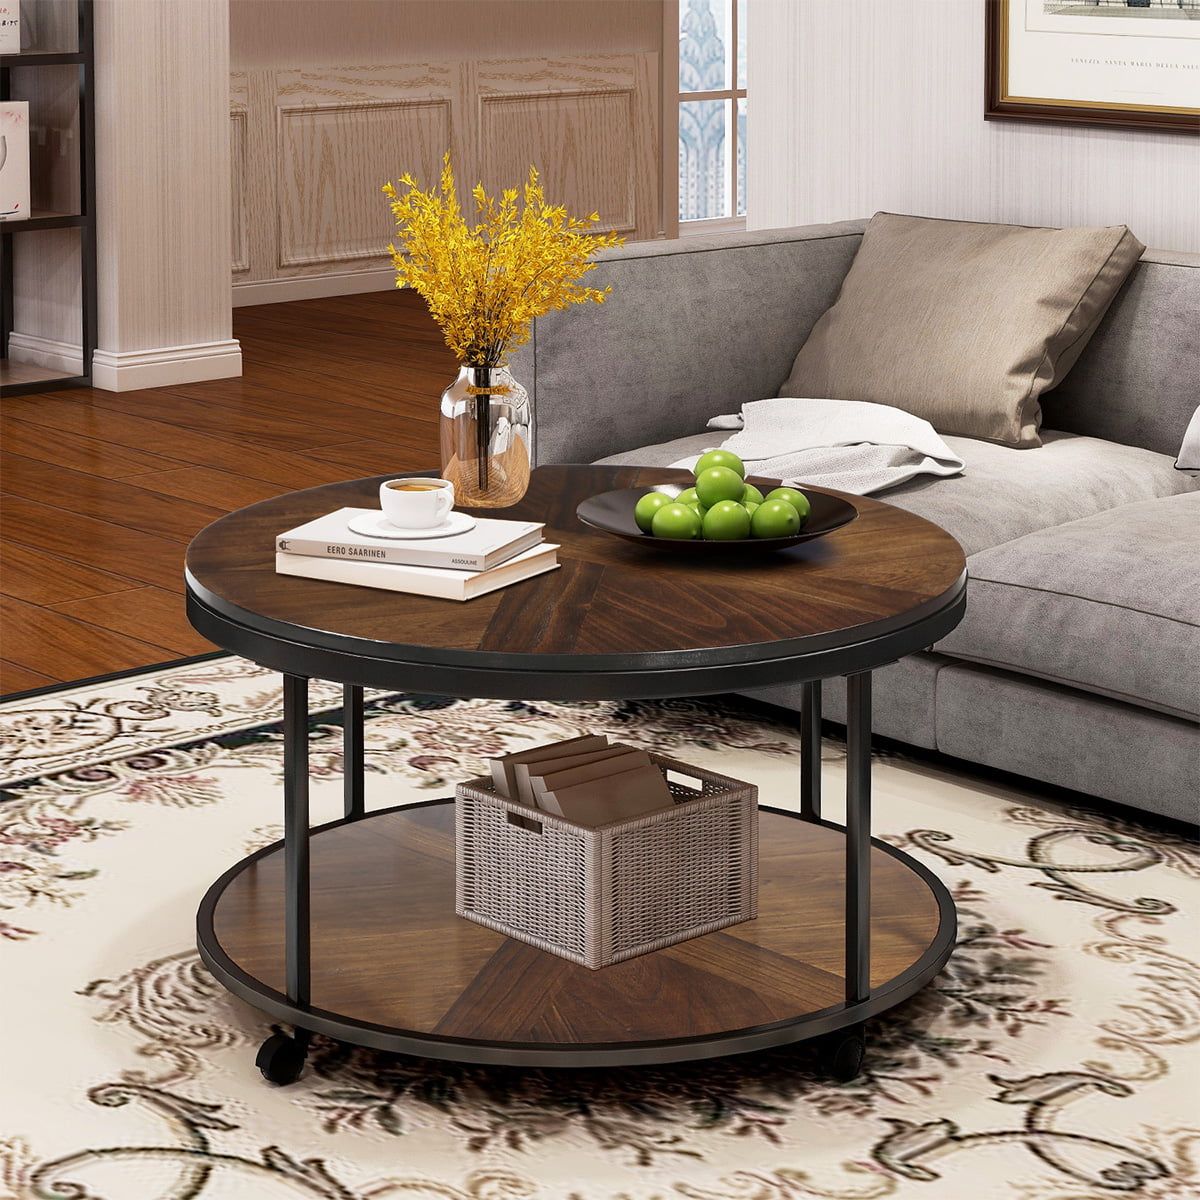 Sentern Round Coffee Table With Caster Wheels And Unique Textured Within Coffee Tables With Casters (Gallery 2 of 21)